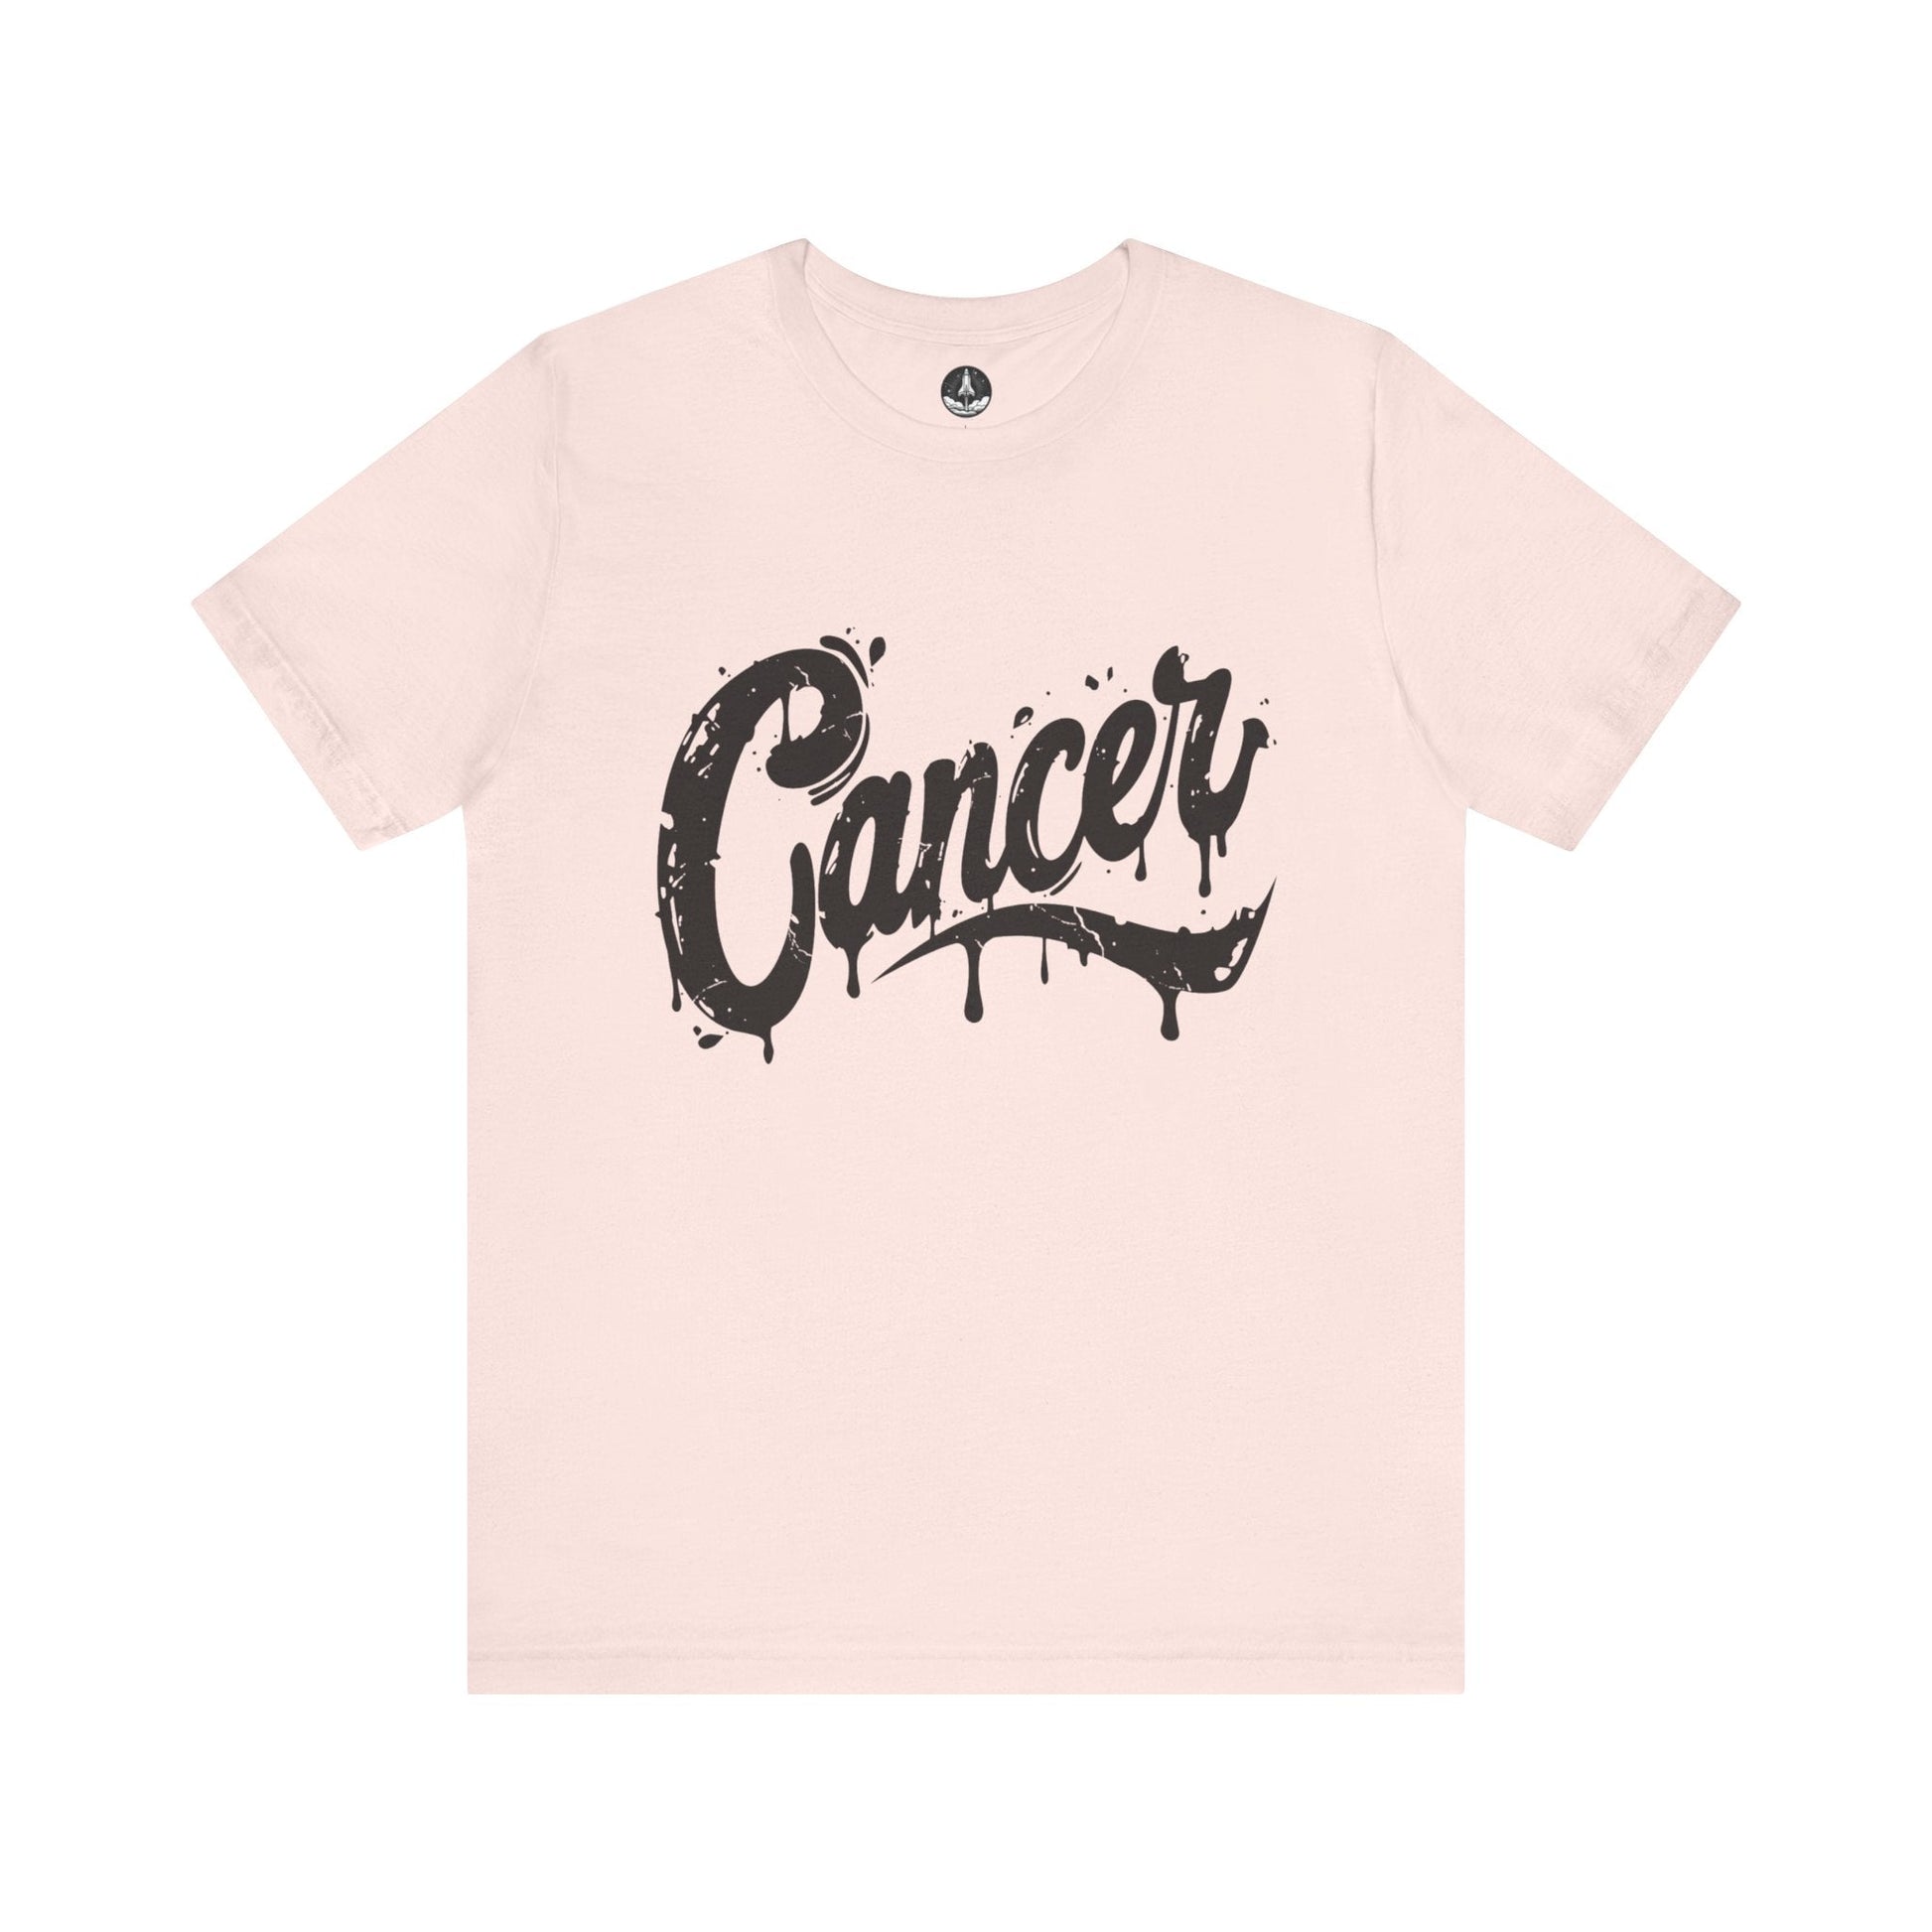 T-Shirt Soft Pink / S Tidal Emotion Cancer TShirt: Flow with Feeling